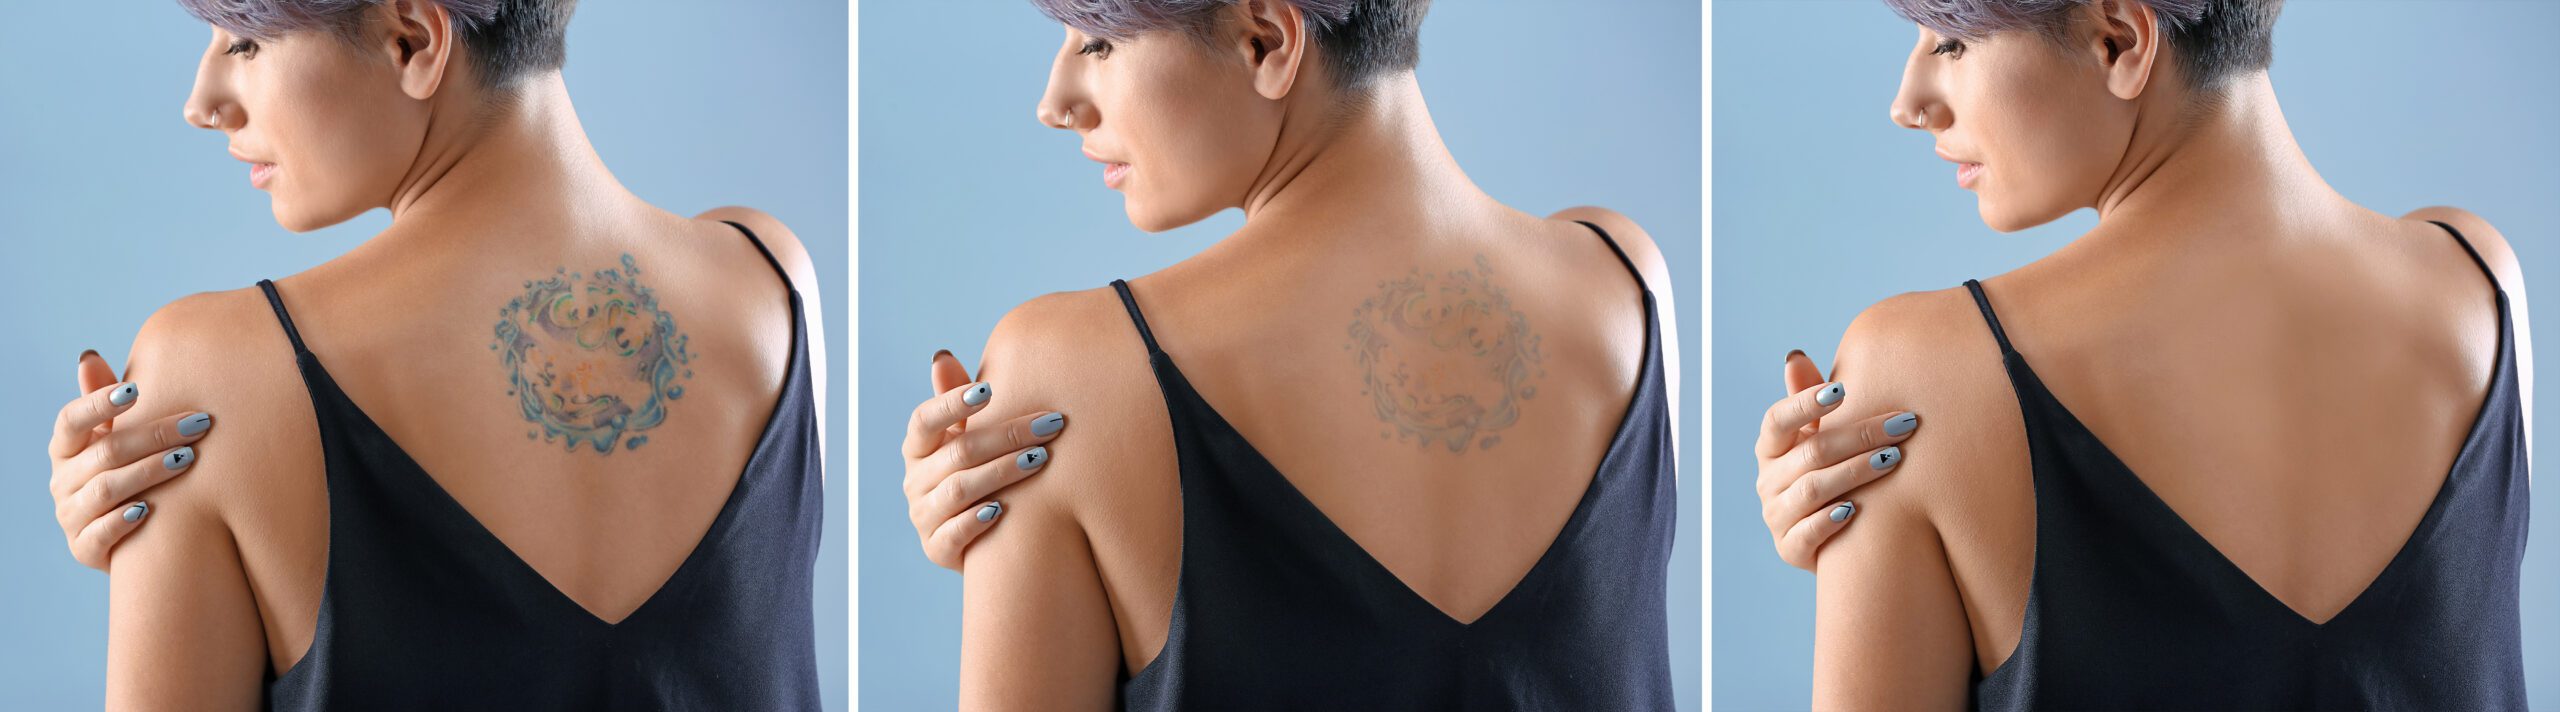 Woman showing fading tattoo